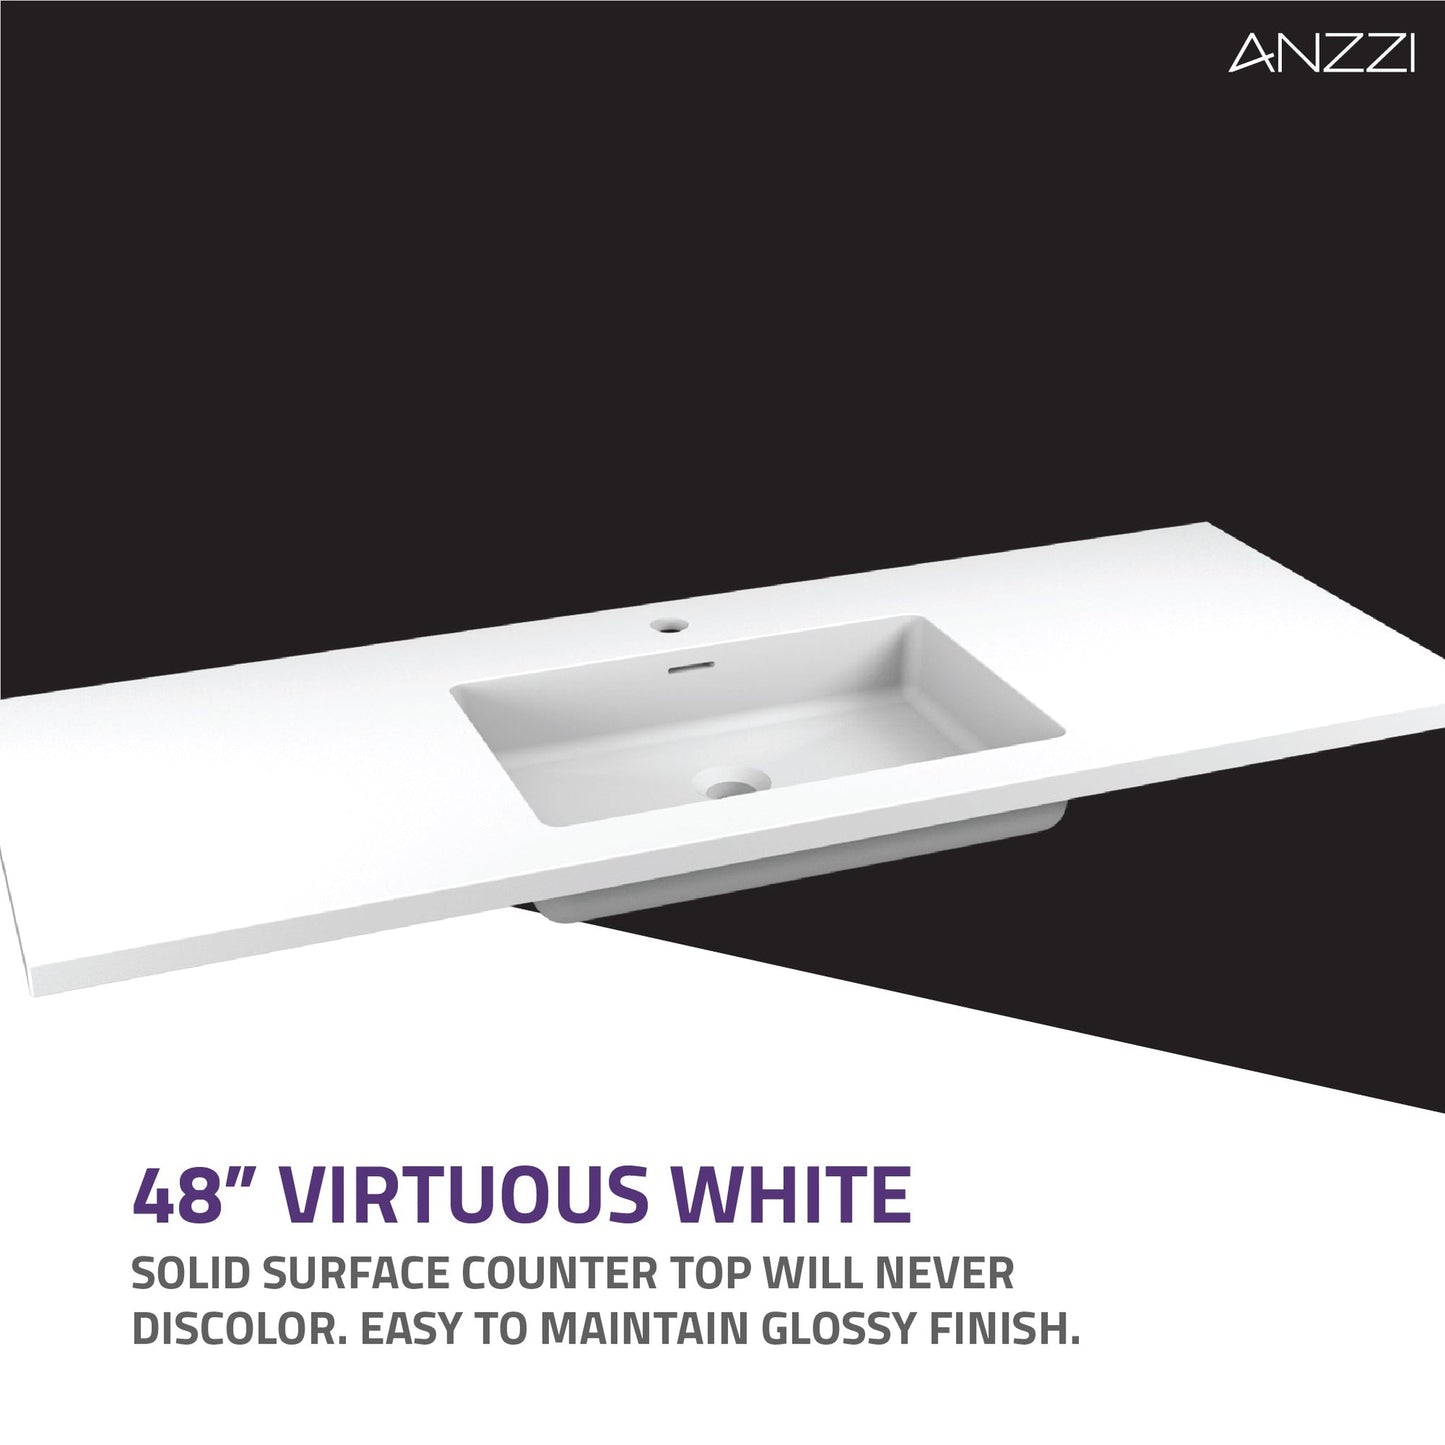 ANZZI Conques 48" x 20" Dark Brown Solid Wood Bathroom Vanity With Glossy White Countertop With Sink and 36" LED Mirror